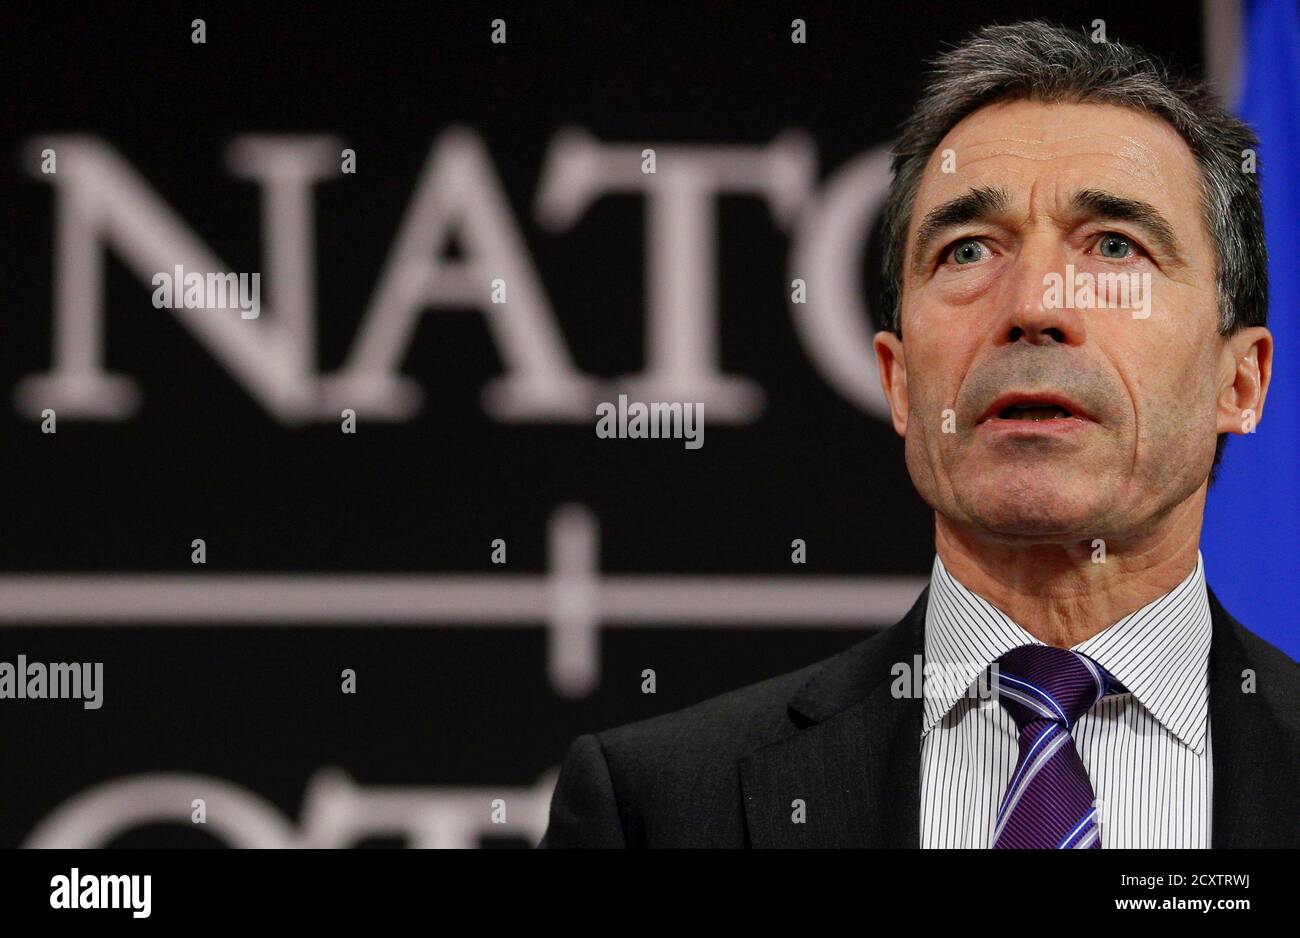 NATO Secretary General Anders Fogh Rasmussen holds a news conference during a NATO defence ministers meeting (NAC) at the Alliance headquarters in Brussels March 10, 2011. NATO defence ministers meeting in Brussels on Thursday and Friday will discuss options to respond to the turmoil in Libya, including a possible no-fly zone, the officials said.      REUTERS/Yves Herman (BELGIUM  - Tags: POLITICS CONFLICT MILITARY) Stock Photo